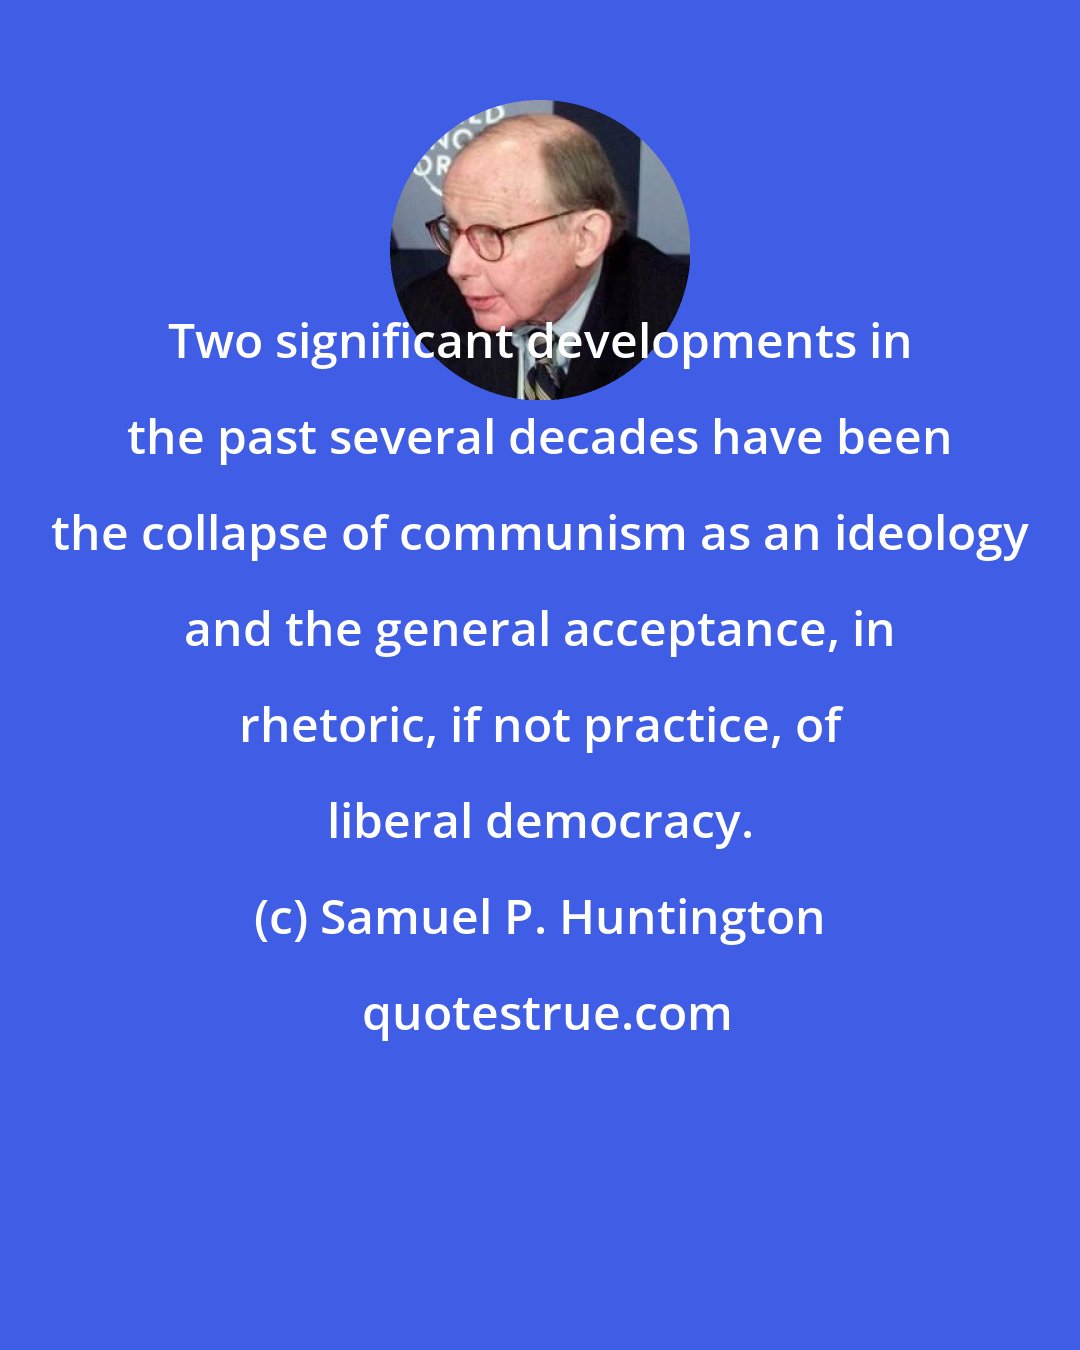 Samuel P. Huntington: Two significant developments in the past several decades have been the collapse of communism as an ideology and the general acceptance, in rhetoric, if not practice, of liberal democracy.